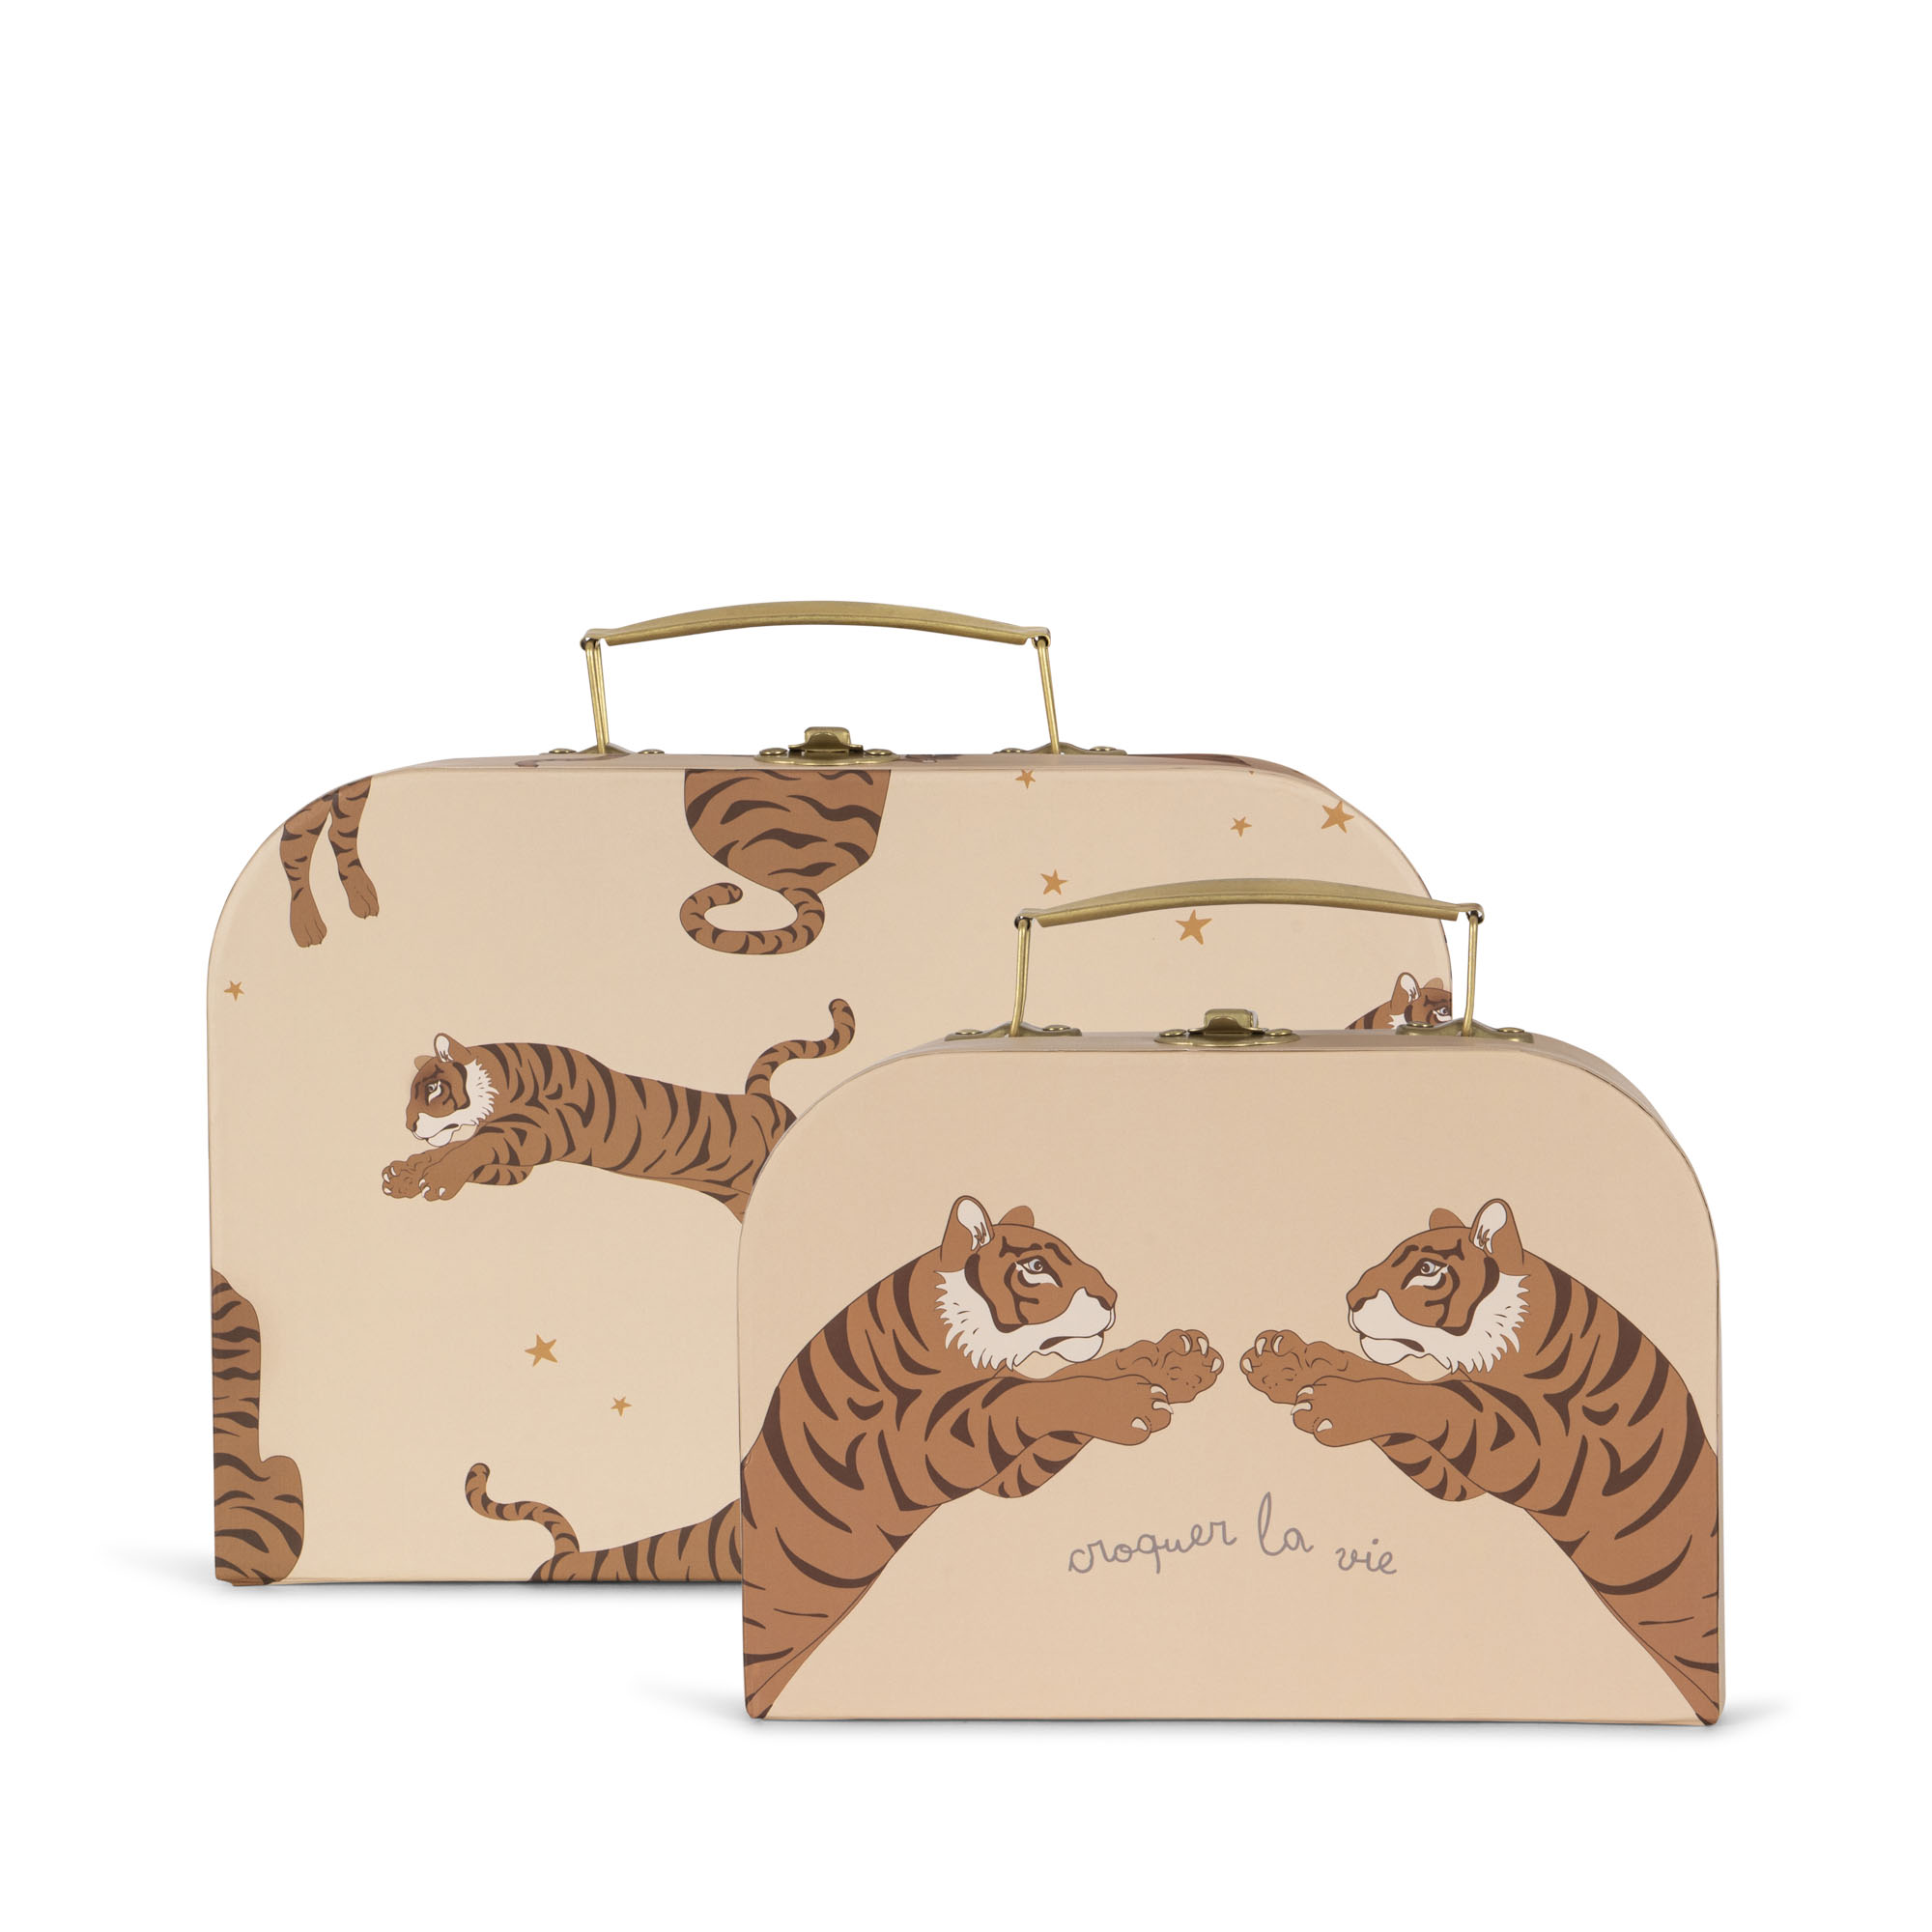 KS100715 - 2 PACK SUITCASE - TIGER SAND - Extra 6